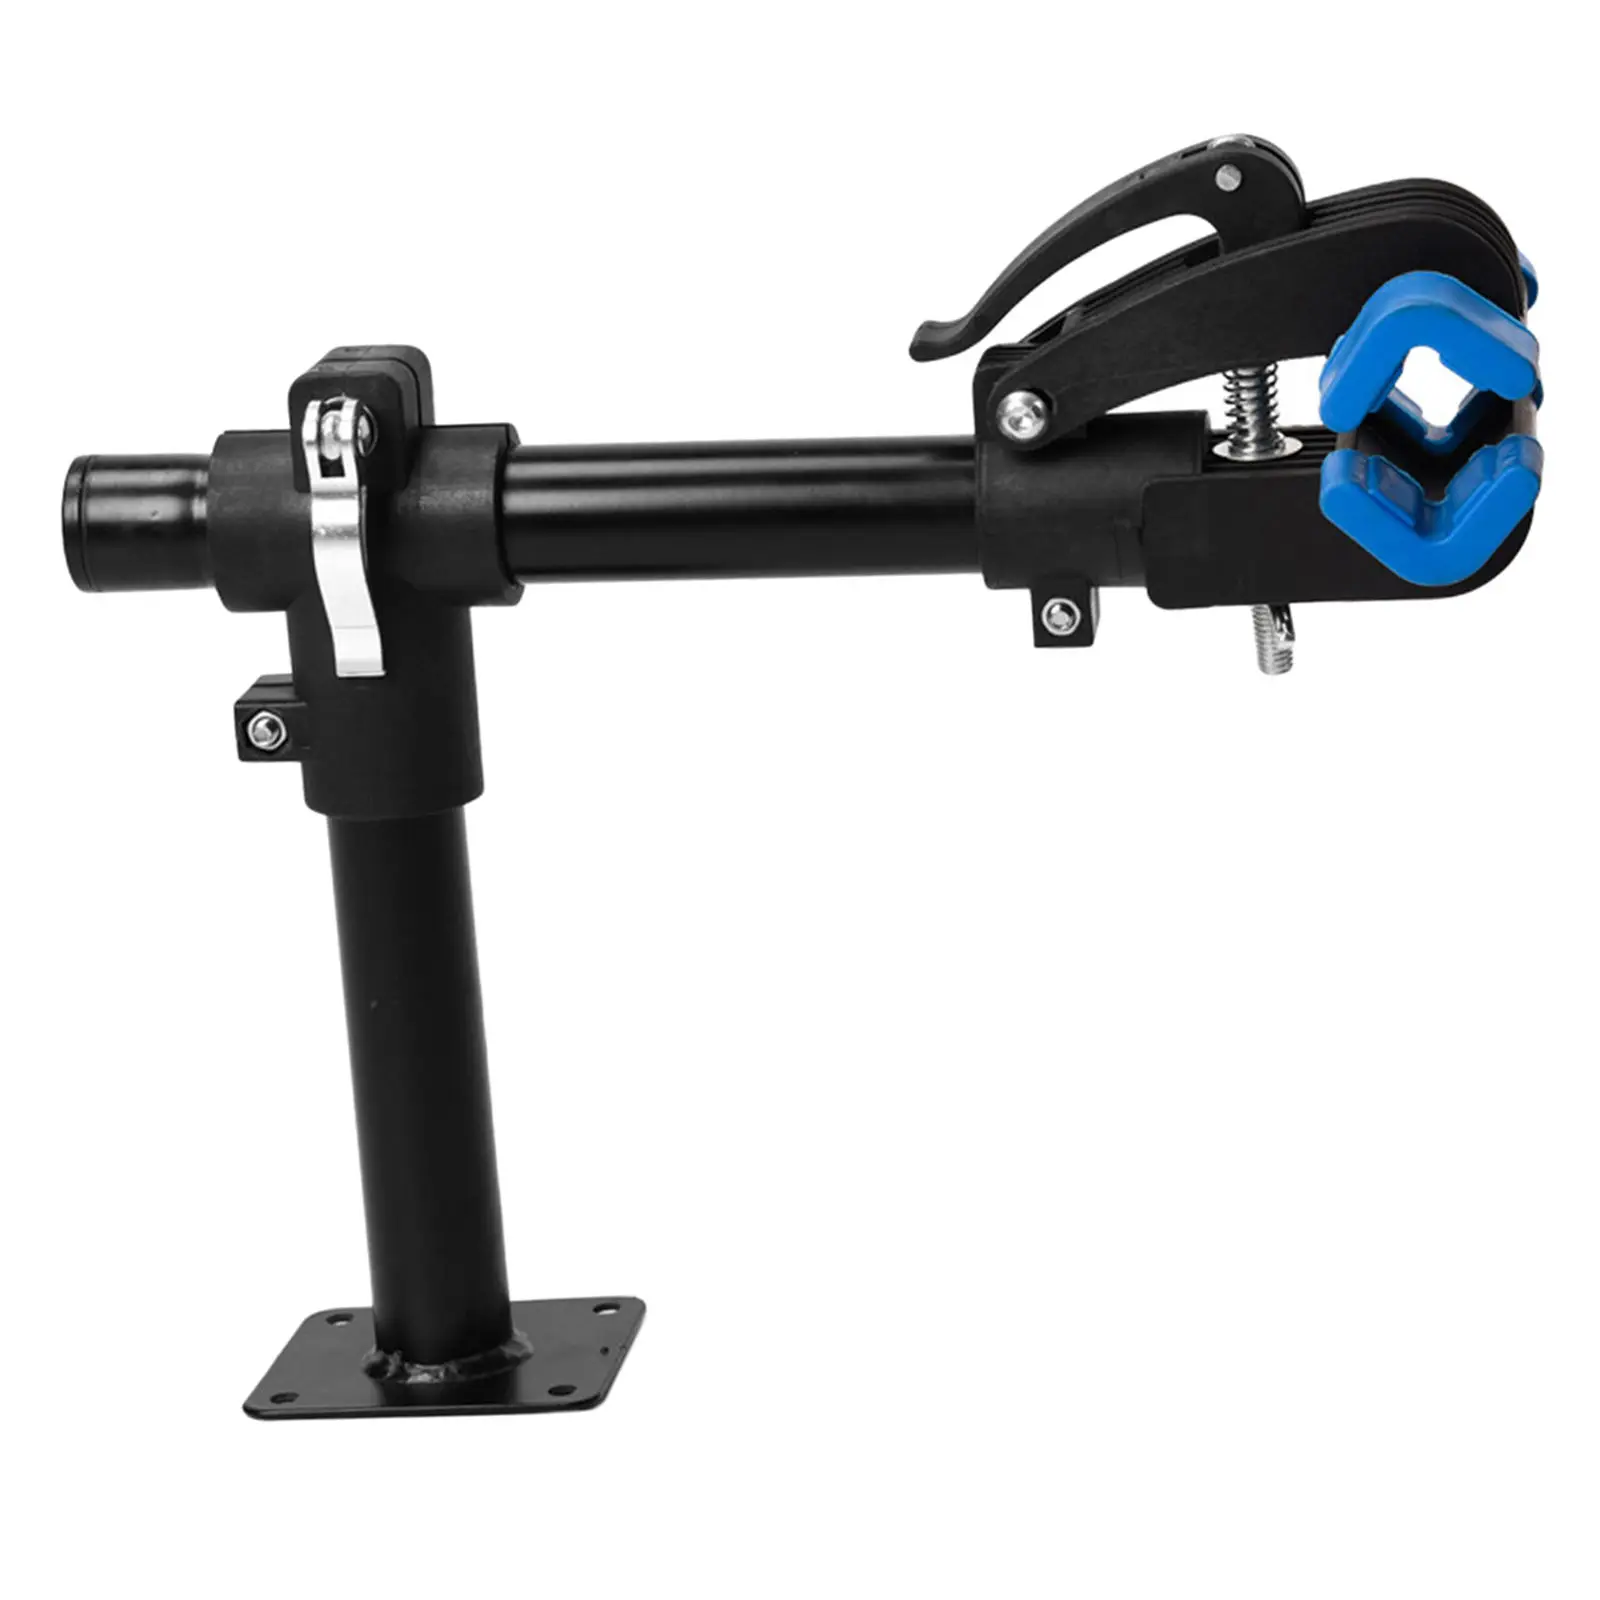 Details about   Adjustment Bracket Clamp Bicycle Mechanic Rack For Garage Or Home Wall-Mounted 